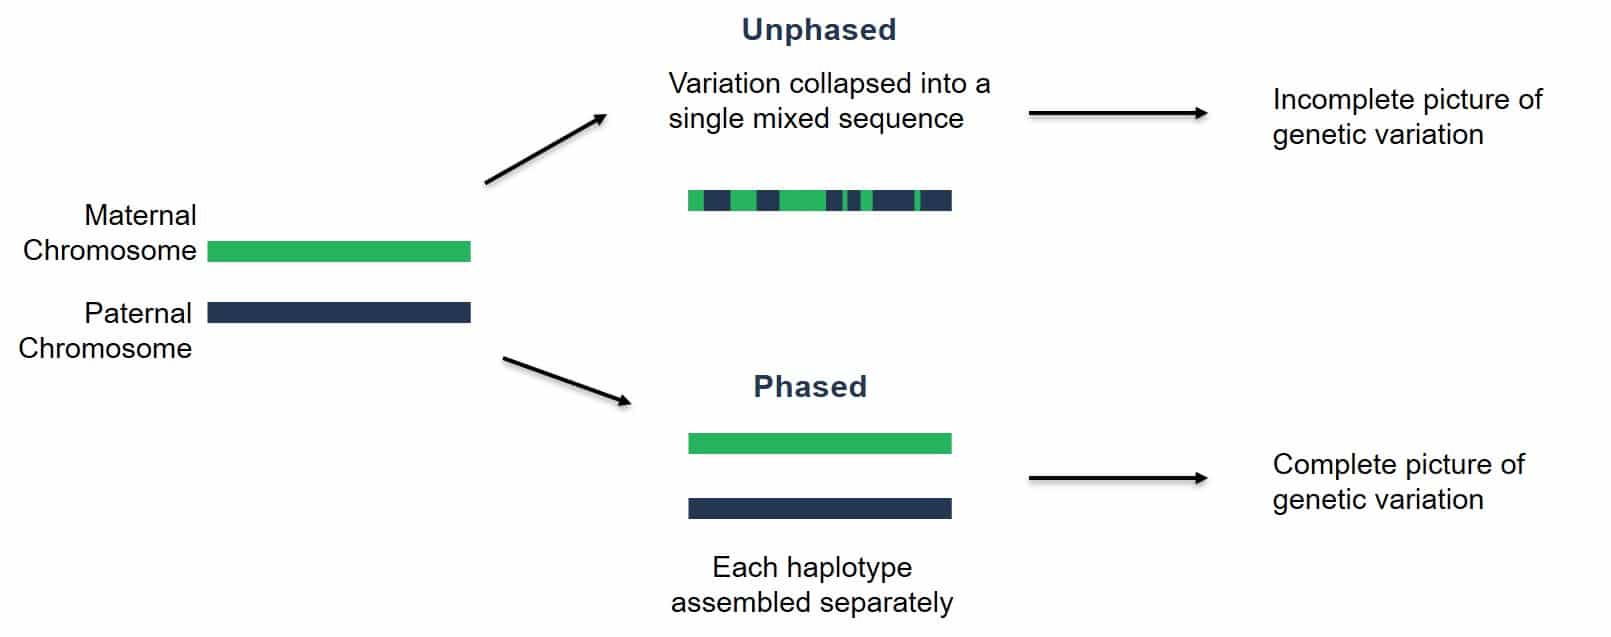 Phasing to seperate material and paternal Haplotypes